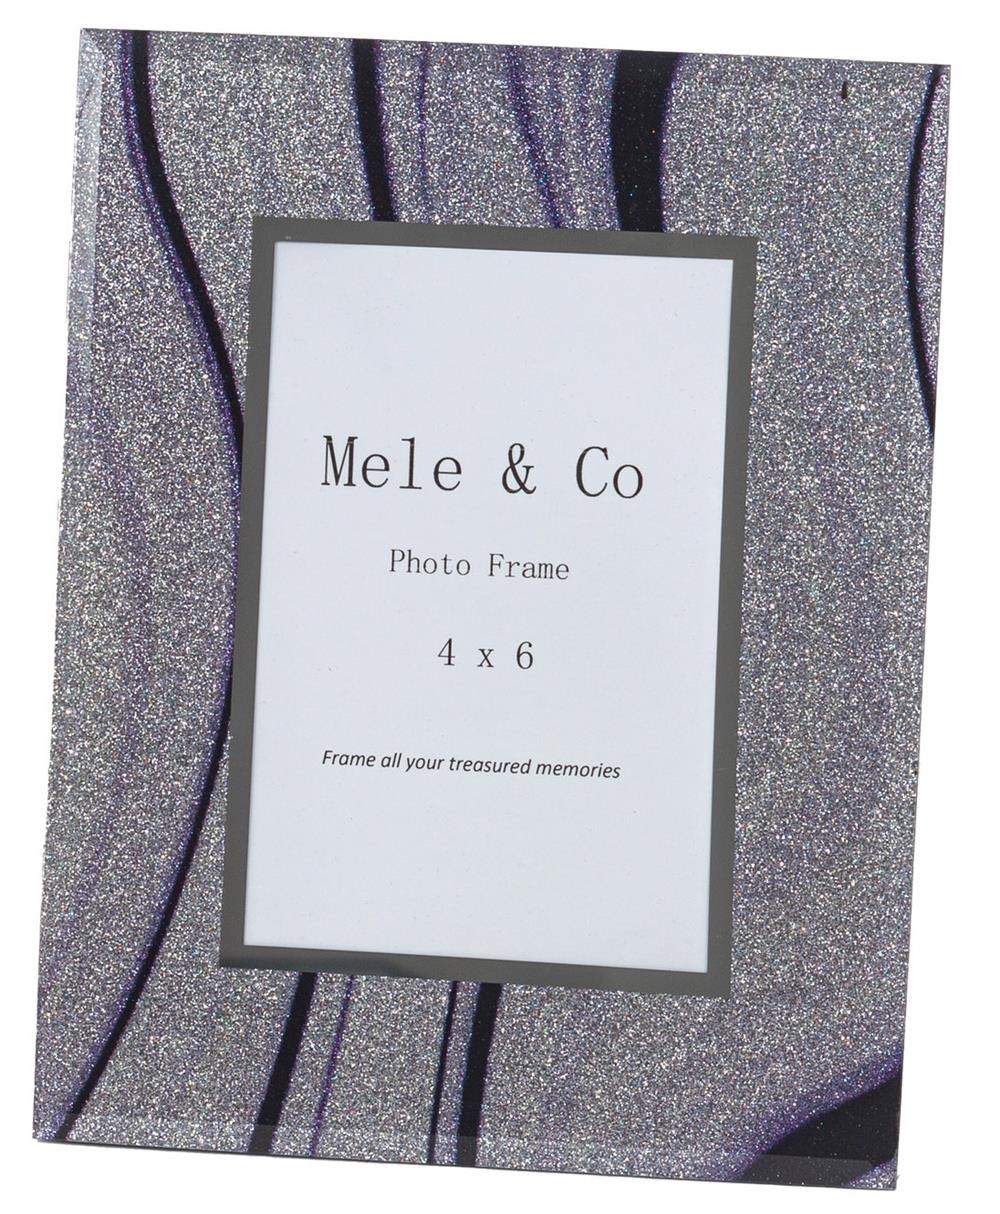 Special Offer Purple Glitter Glass Jewel case + Free Matching Photo Frame